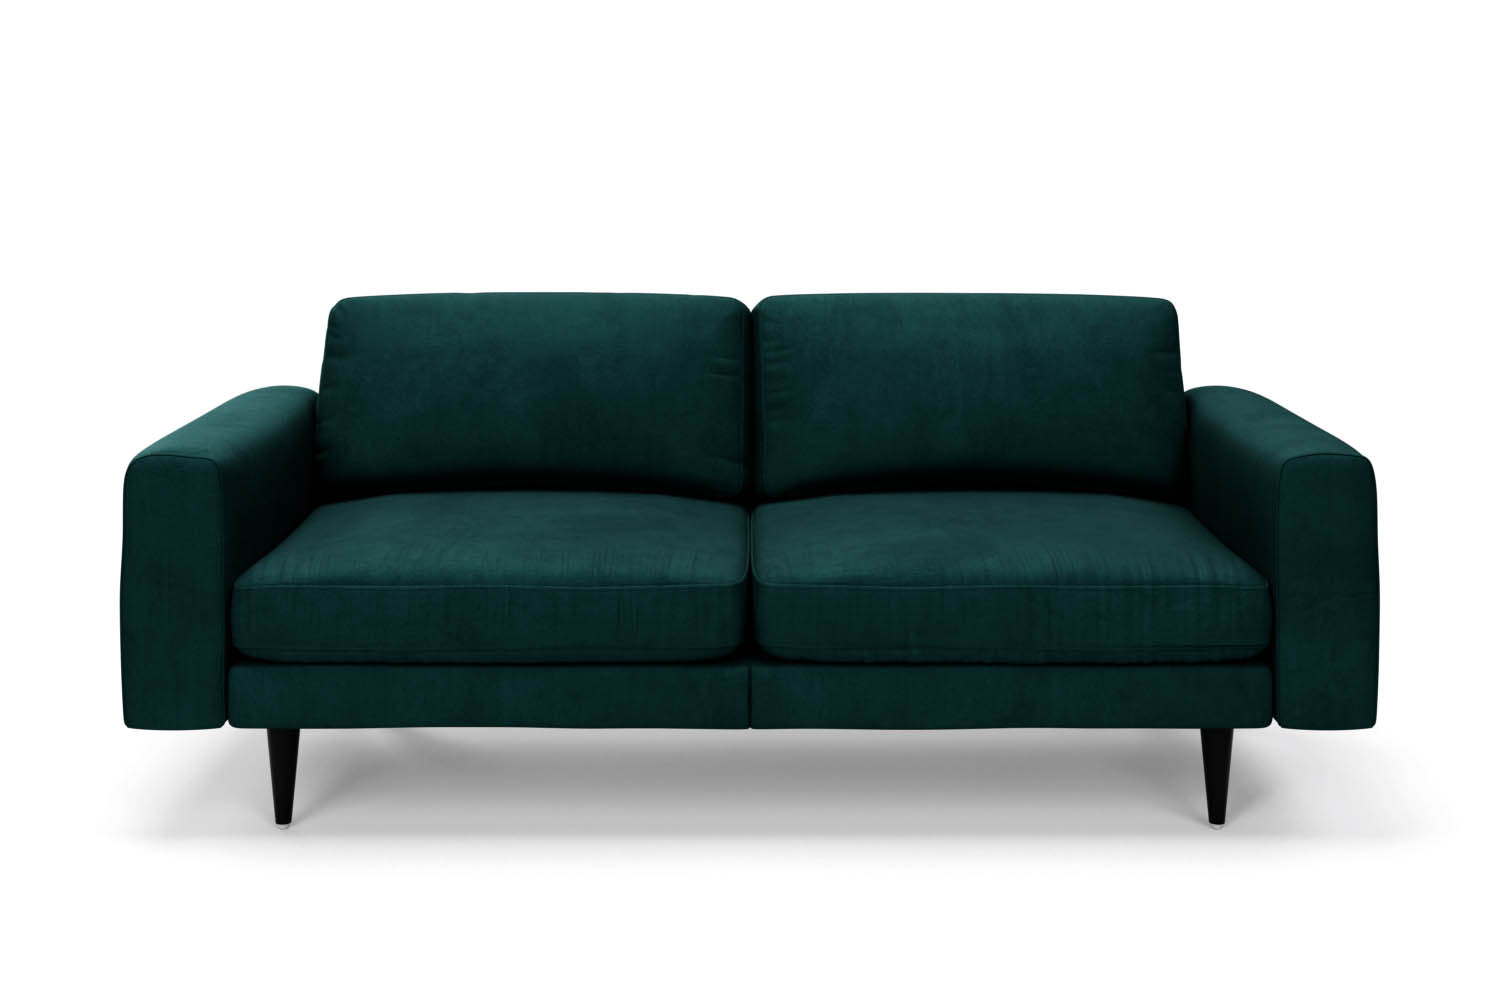 SNUG | The Big Chill 3 Seater Sofa in Pine Green variant_40837198905392